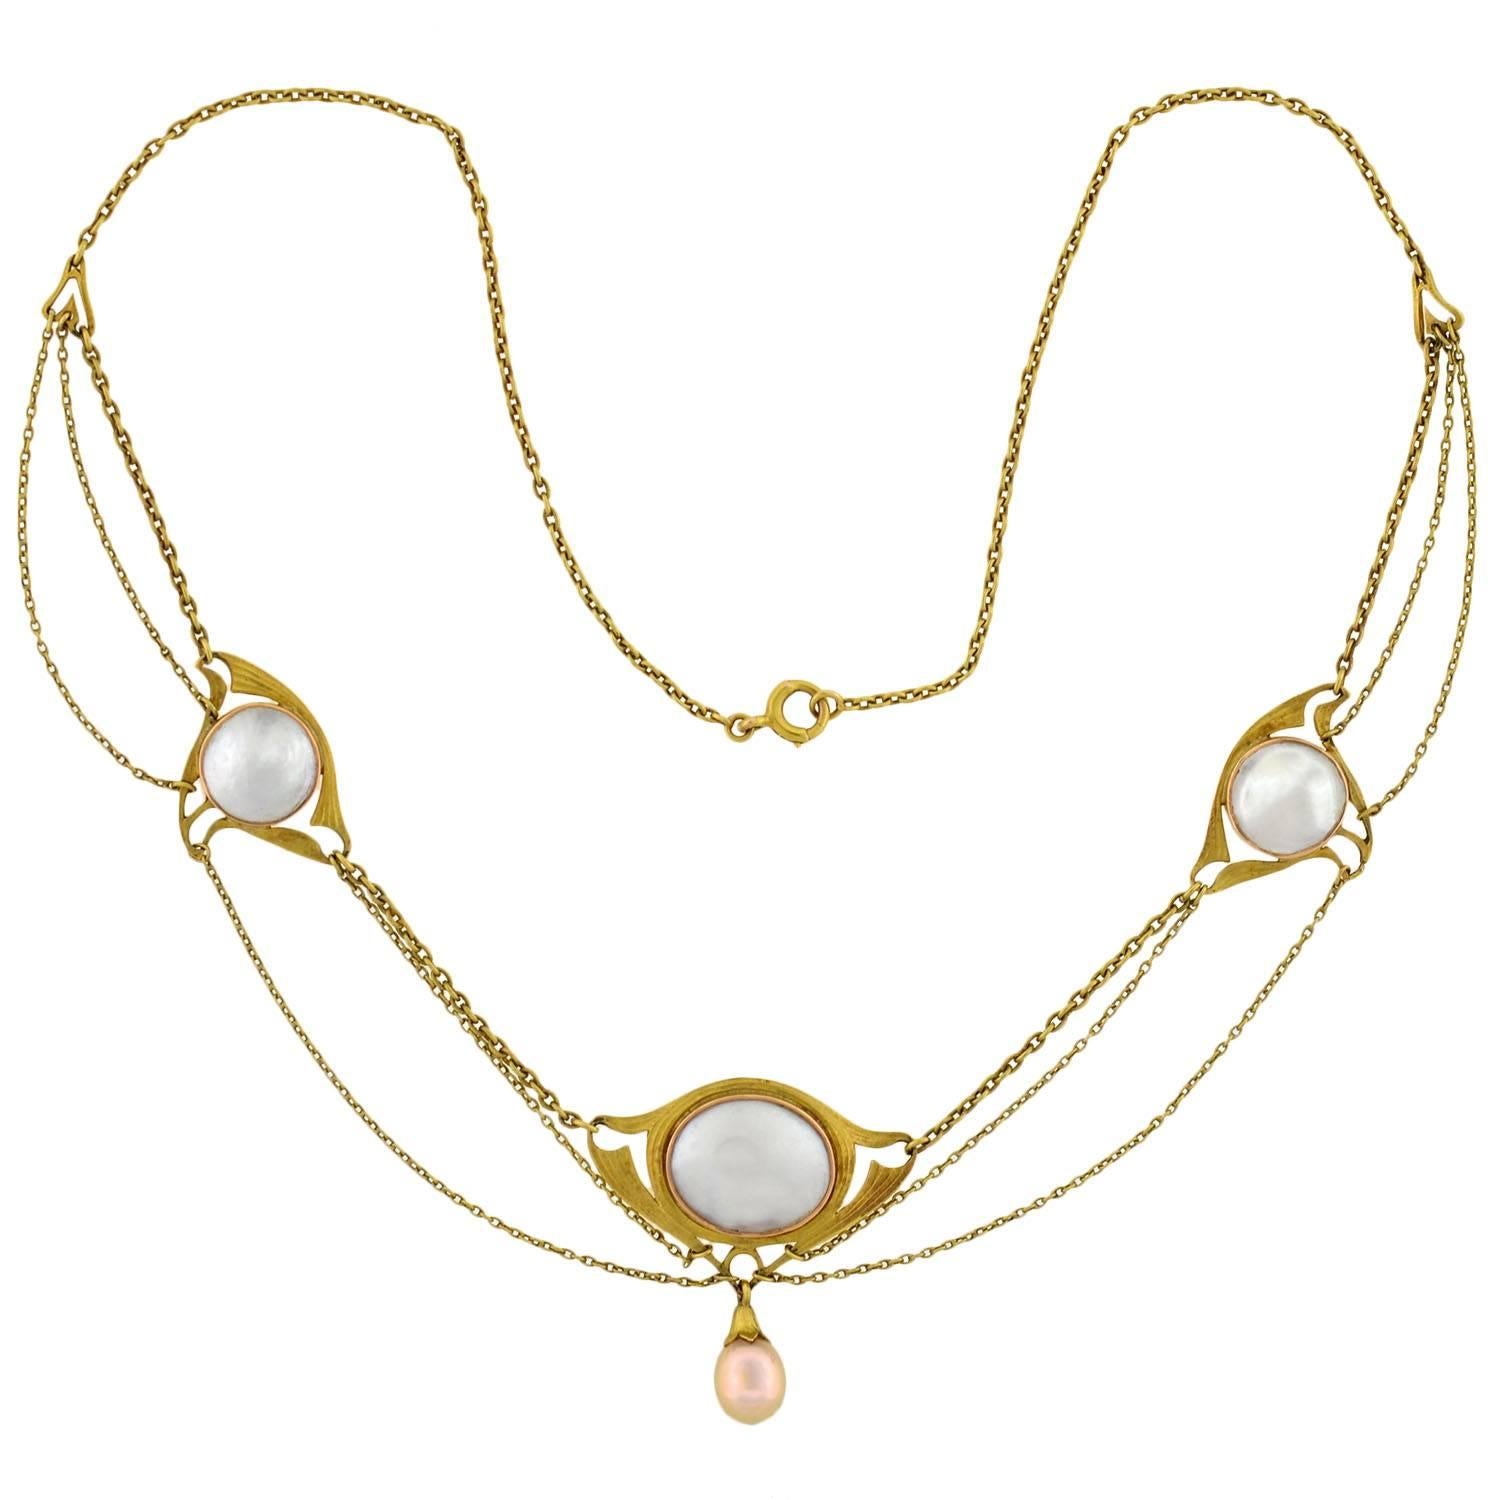 An exquisite blister pearl necklace from the Art Nouveau (ca1910) era! This unique necklace, which is made of 18kt yellow gold, holds three ornate links with the largest in the middle. Each holds a lovely blister pearl at its center, which is framed